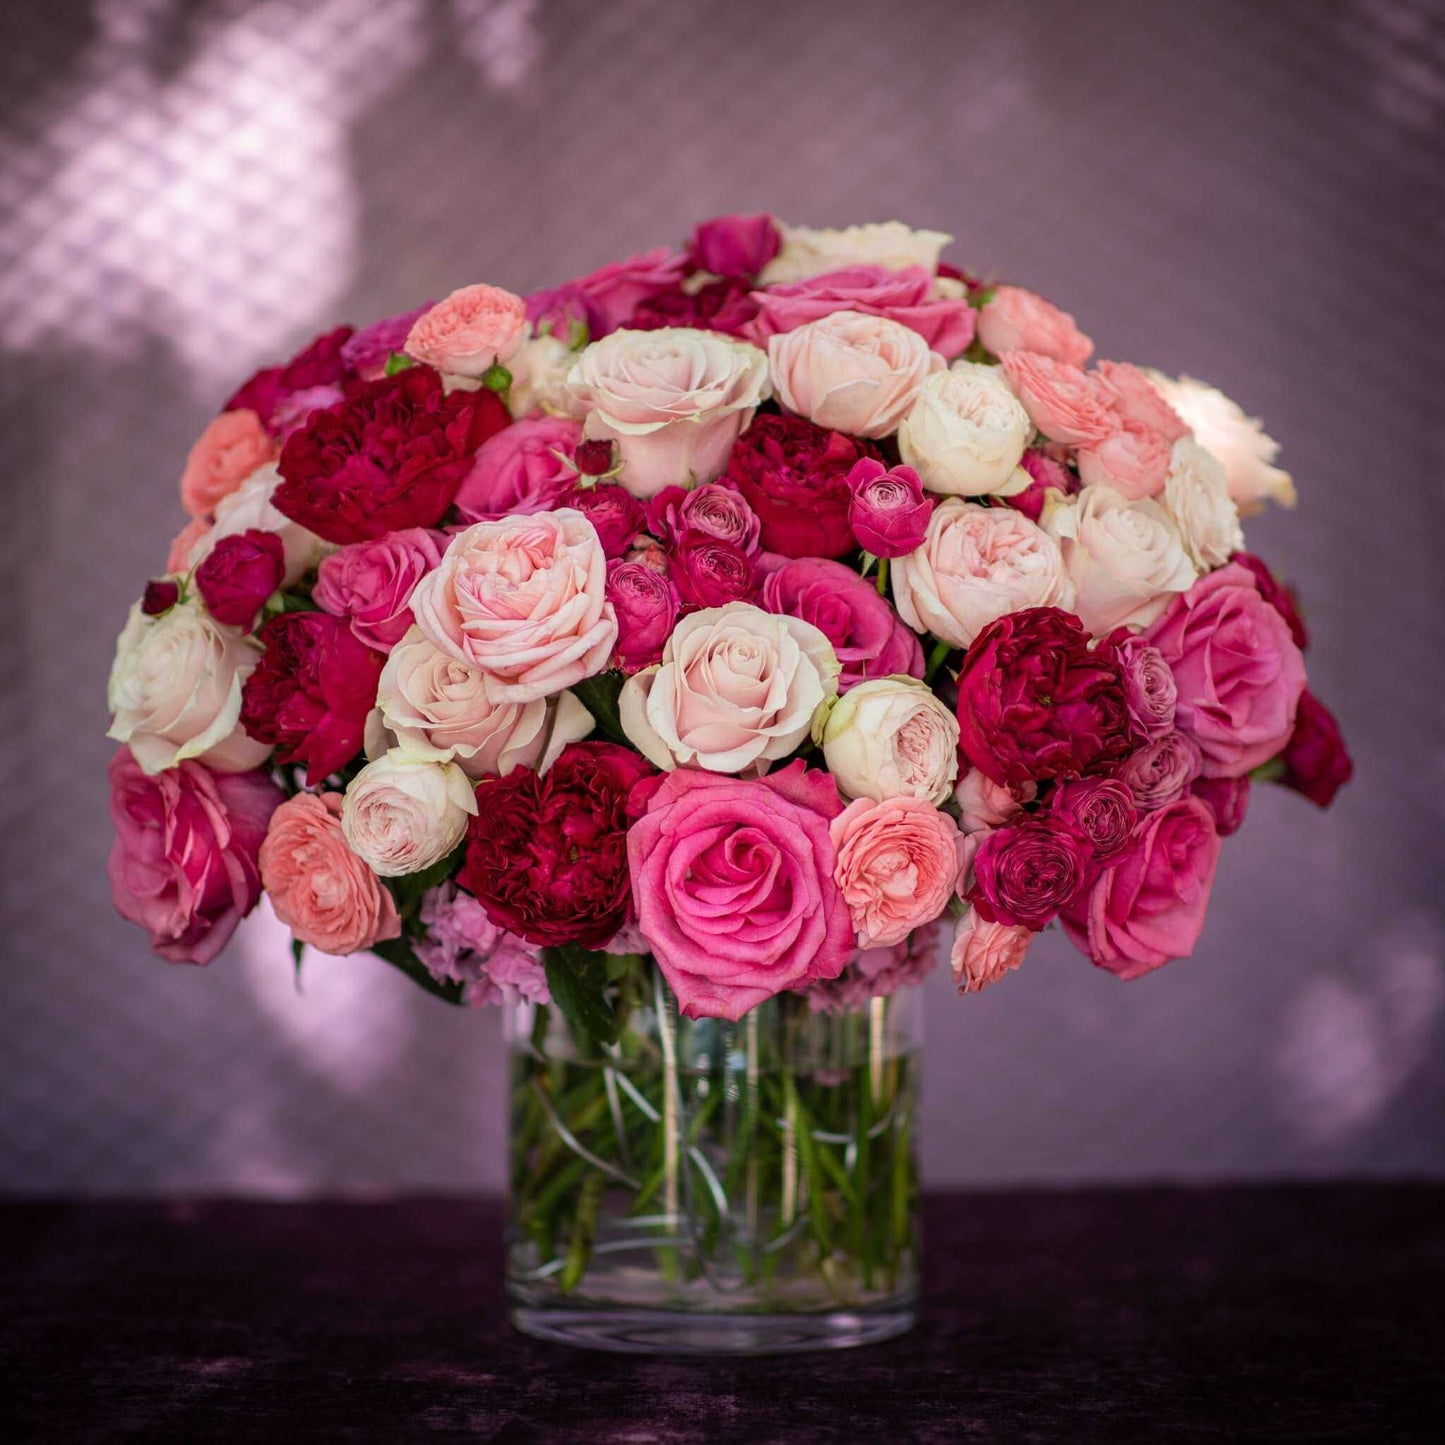 Mixed Pink Rose Vase Arrangement - Pulbrook and Gould Flowers London